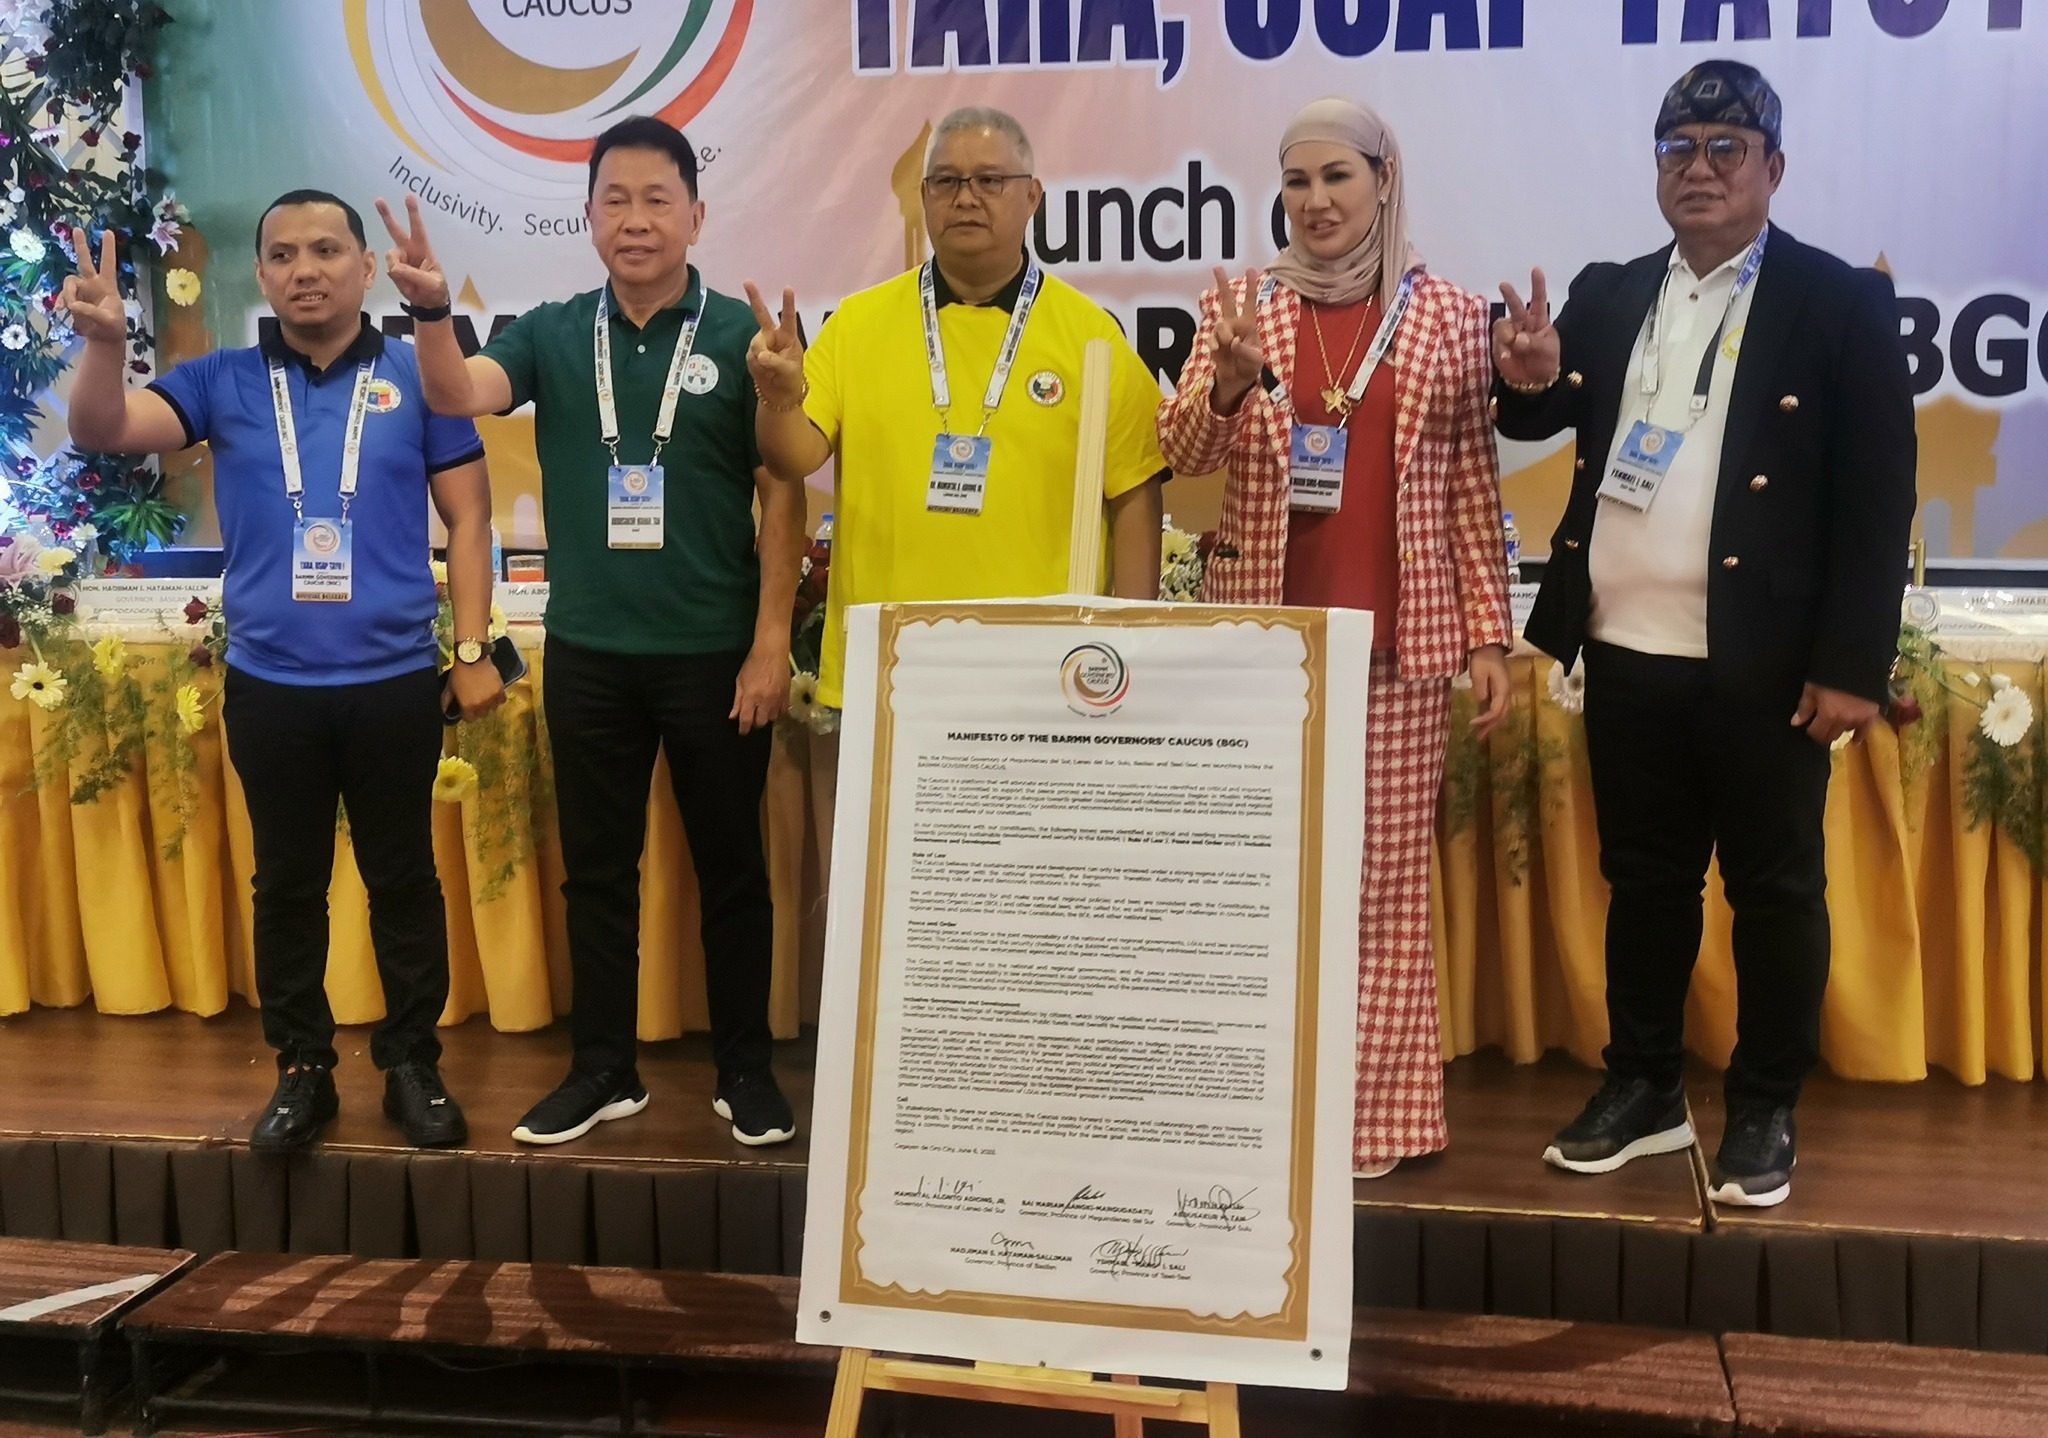 4 BARMM governors meet in Cagayan de Oro, unveil alliance for ‘development’